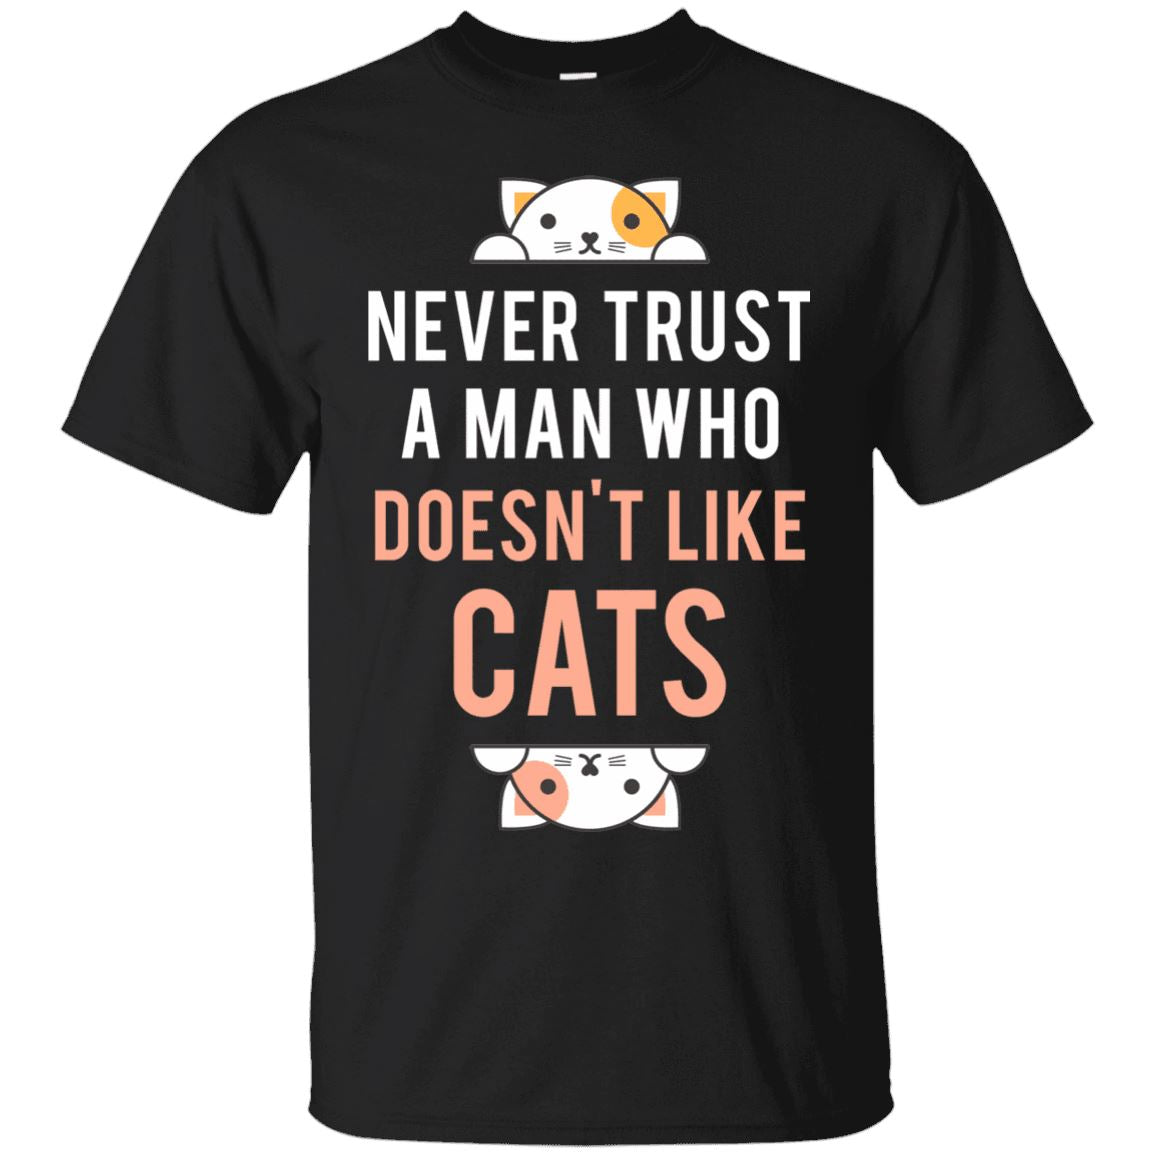 Cat Shirt - Never Trust A Man Who Doesn't Like Cats